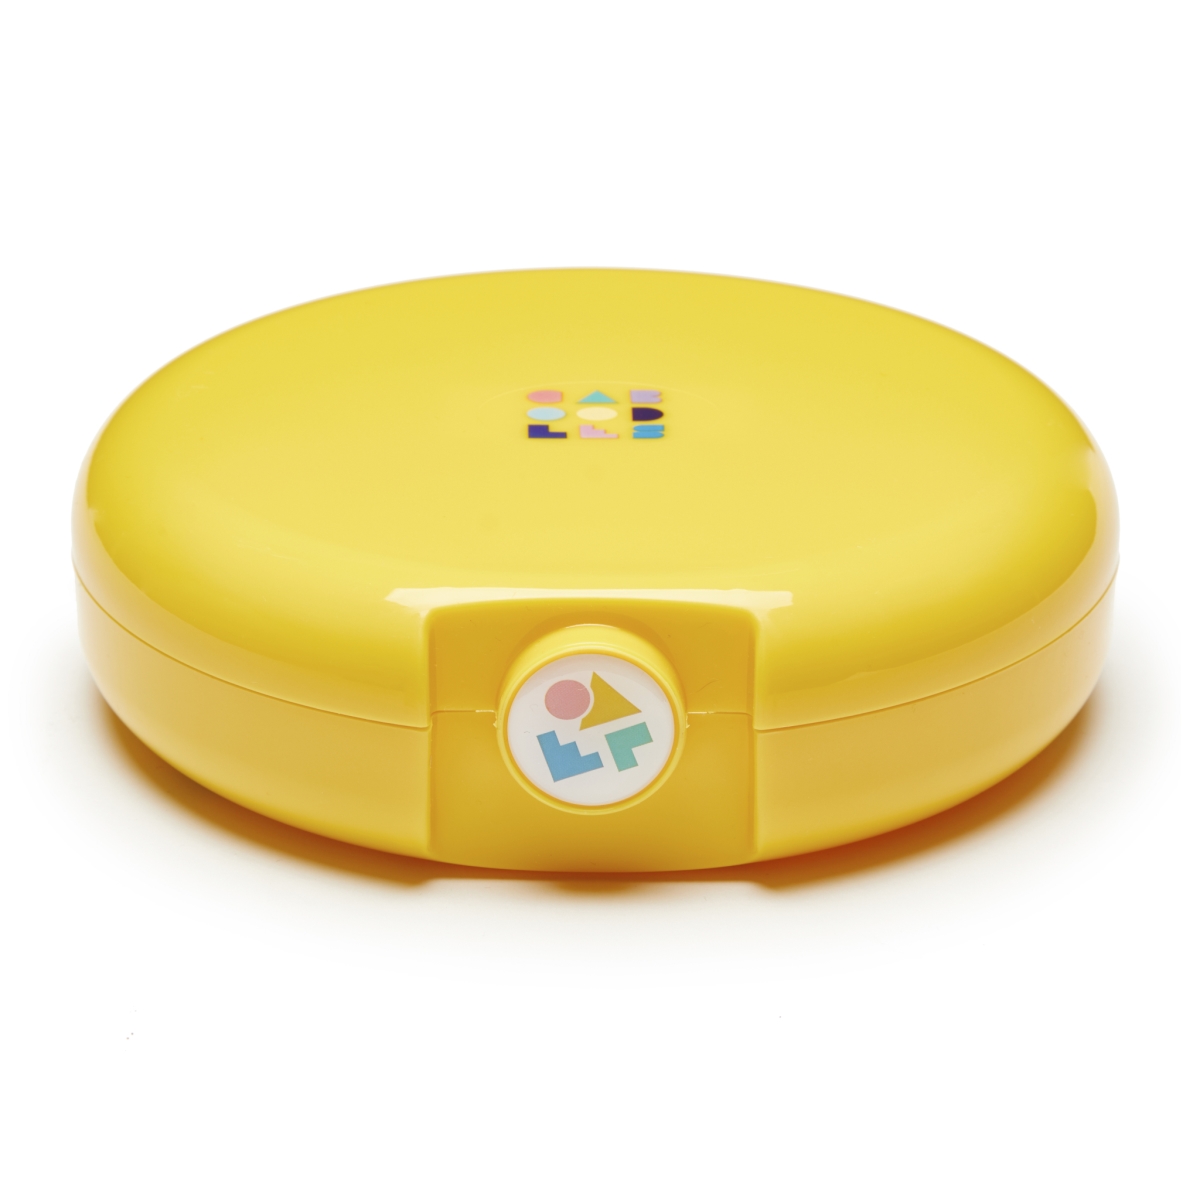 Cab5860y1 Cosmic Cosmetic Compact, Yellow